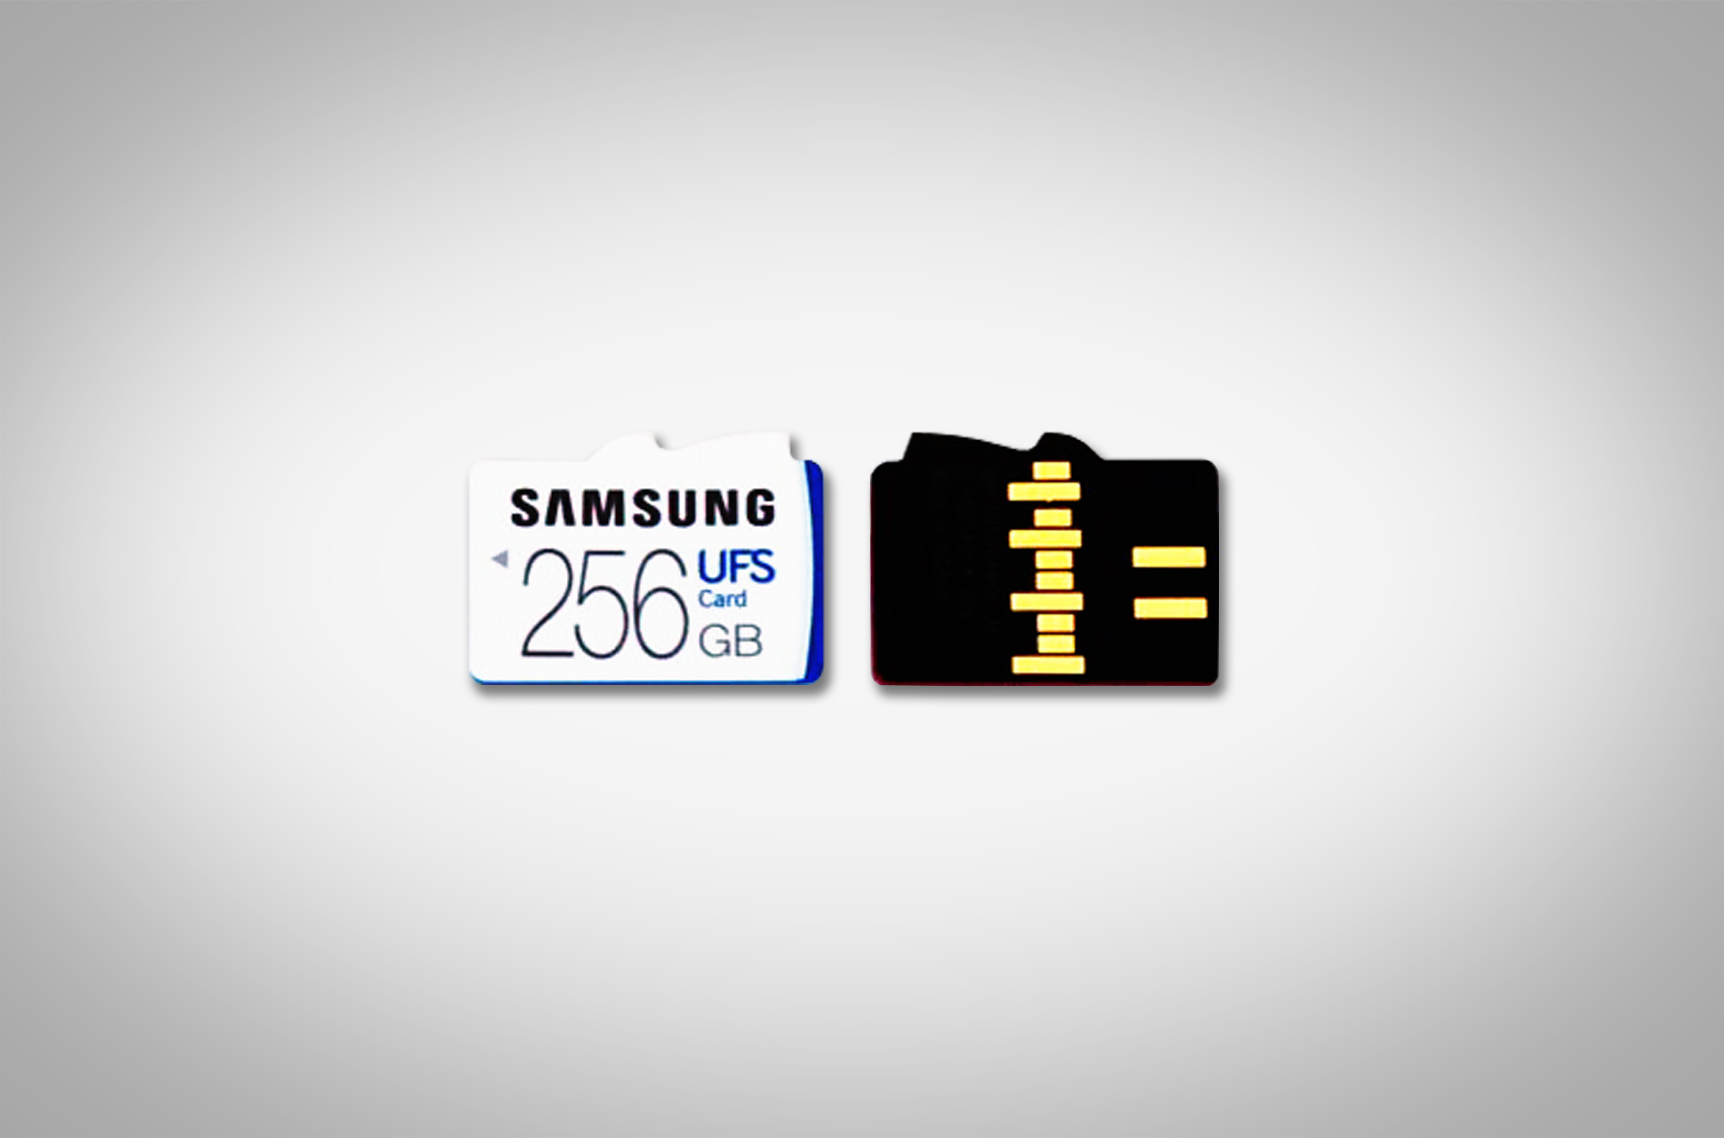 UFS 02 - Samsung unveils the sucessor to the MicroSD Cards as UFS Memory cards with much faster speeds